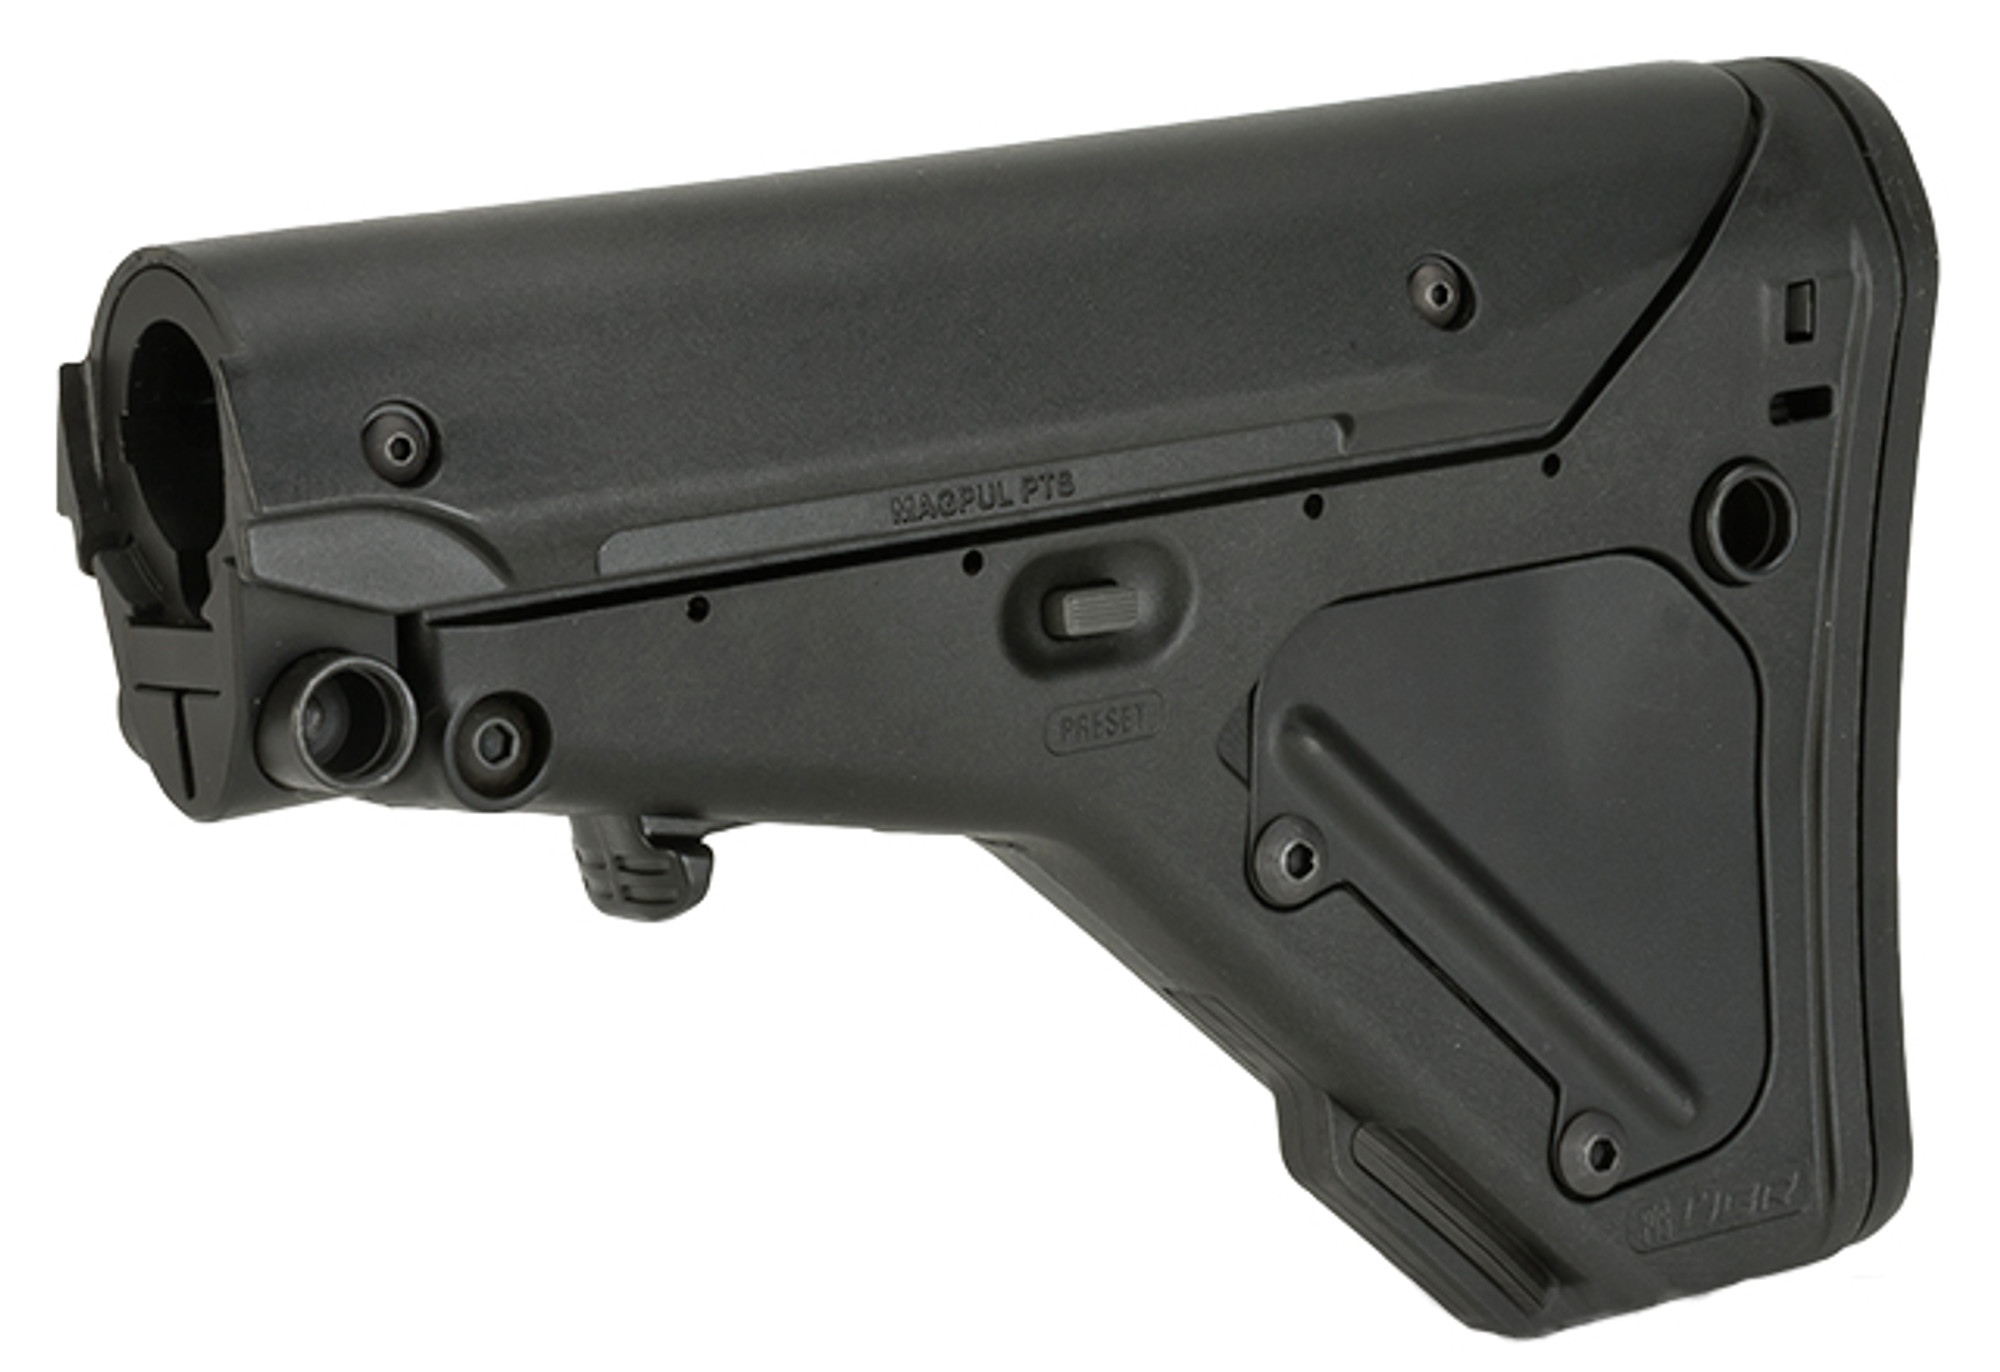 PTS Licensed UBR (Utility Battle Rifle) Stock For M4 / M16 Series Airsoft AEG - Black